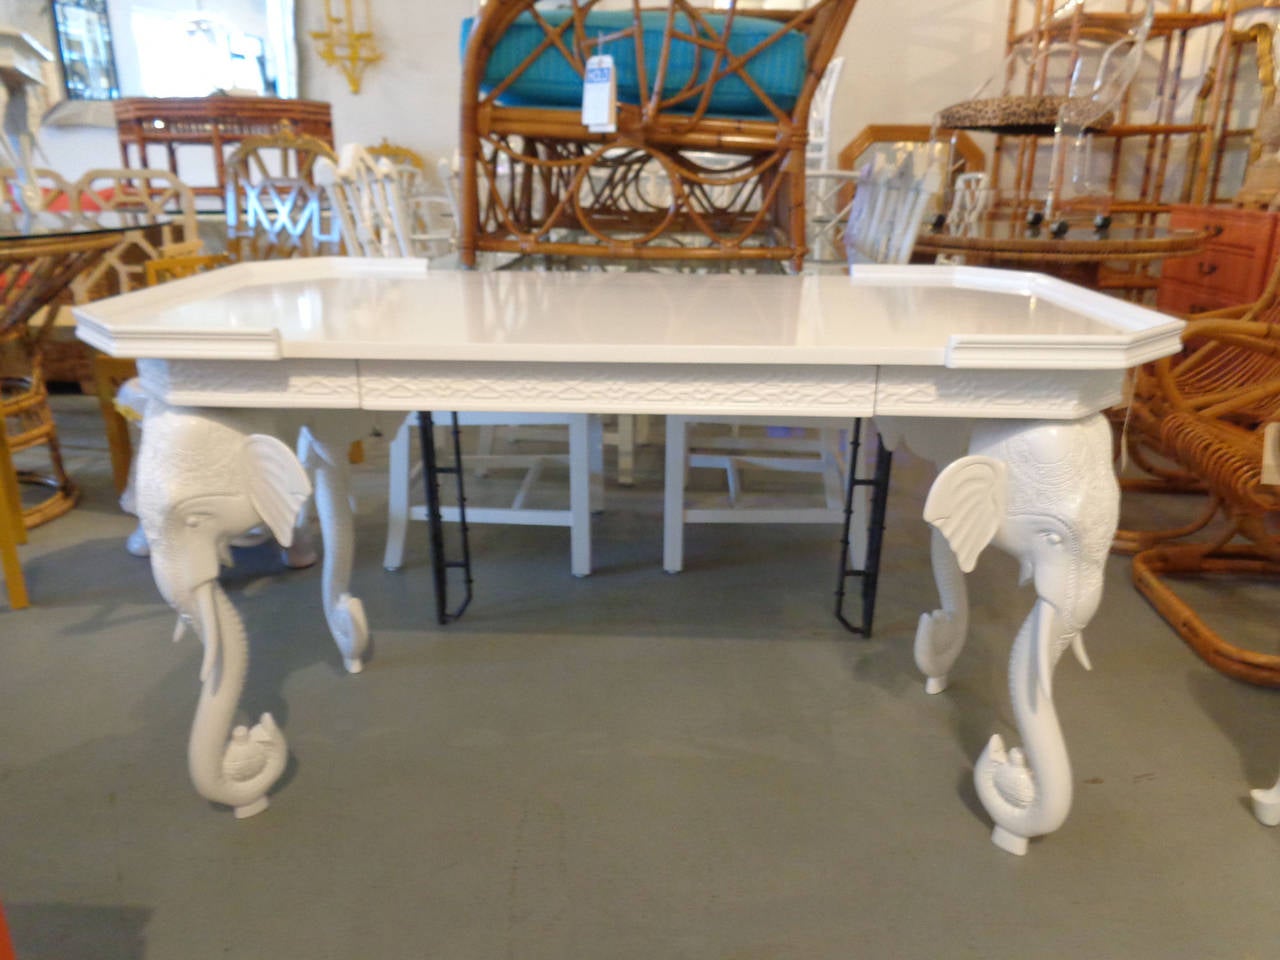 Hollywood Regency Style Gampel Stoll Fretwork Elephant desk NEWLY lacquered white.